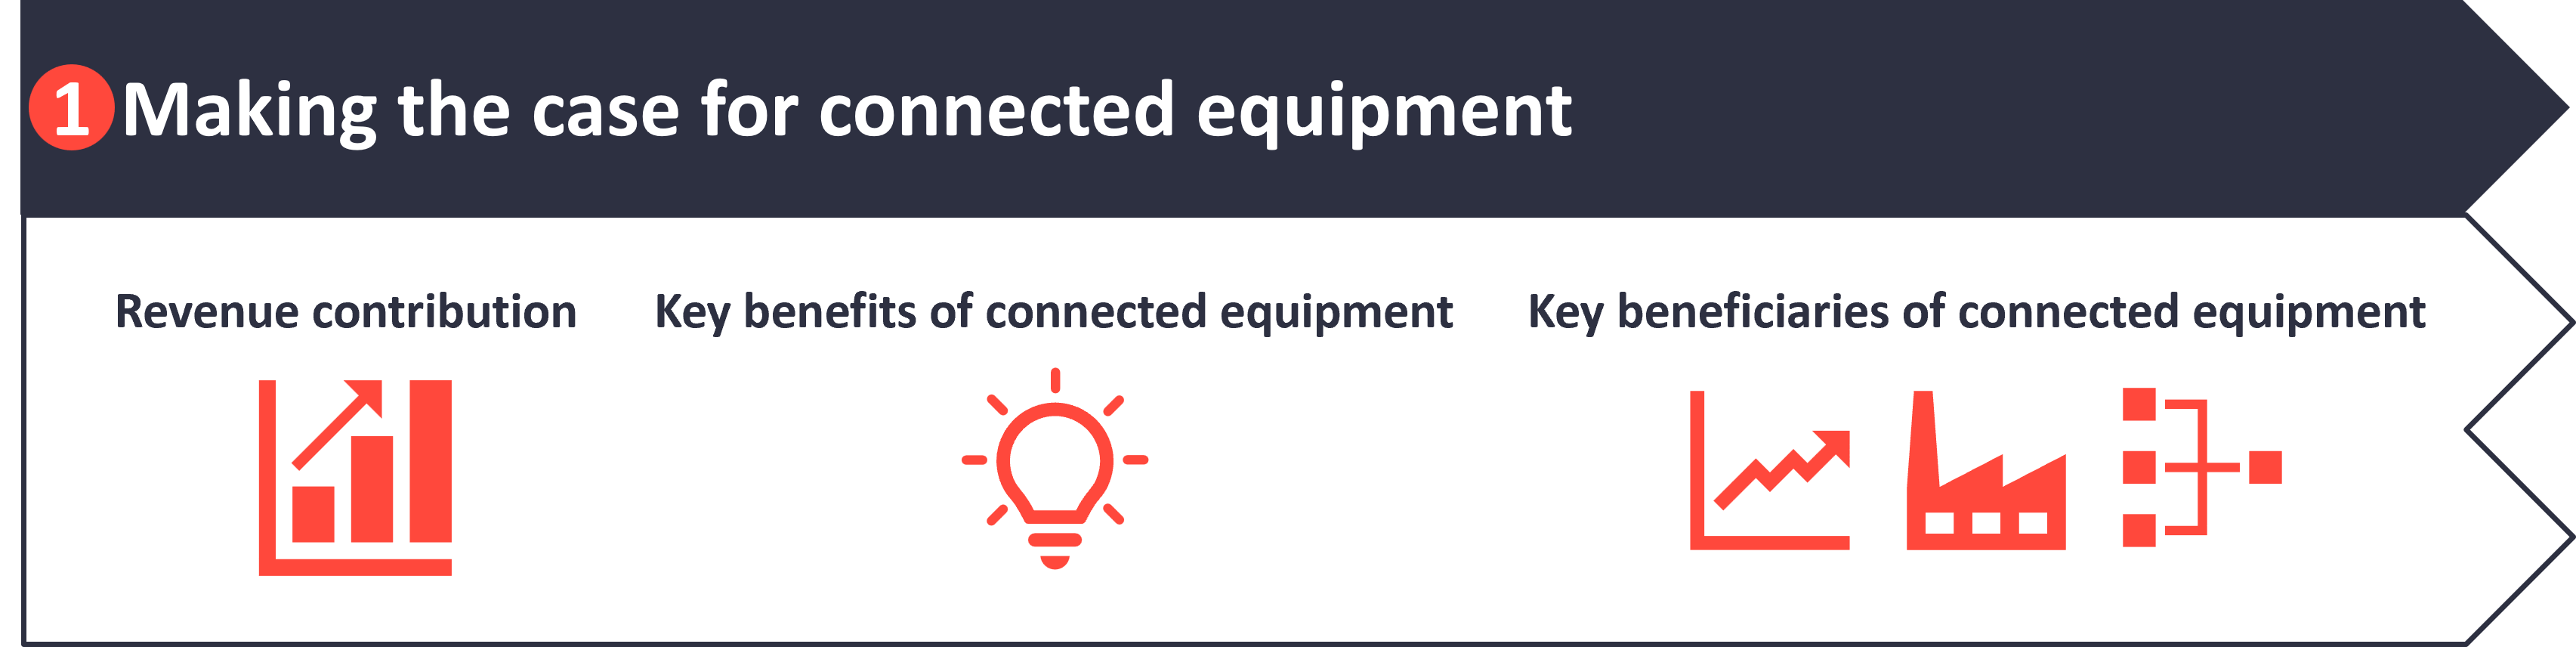 Making the case for connected equipment